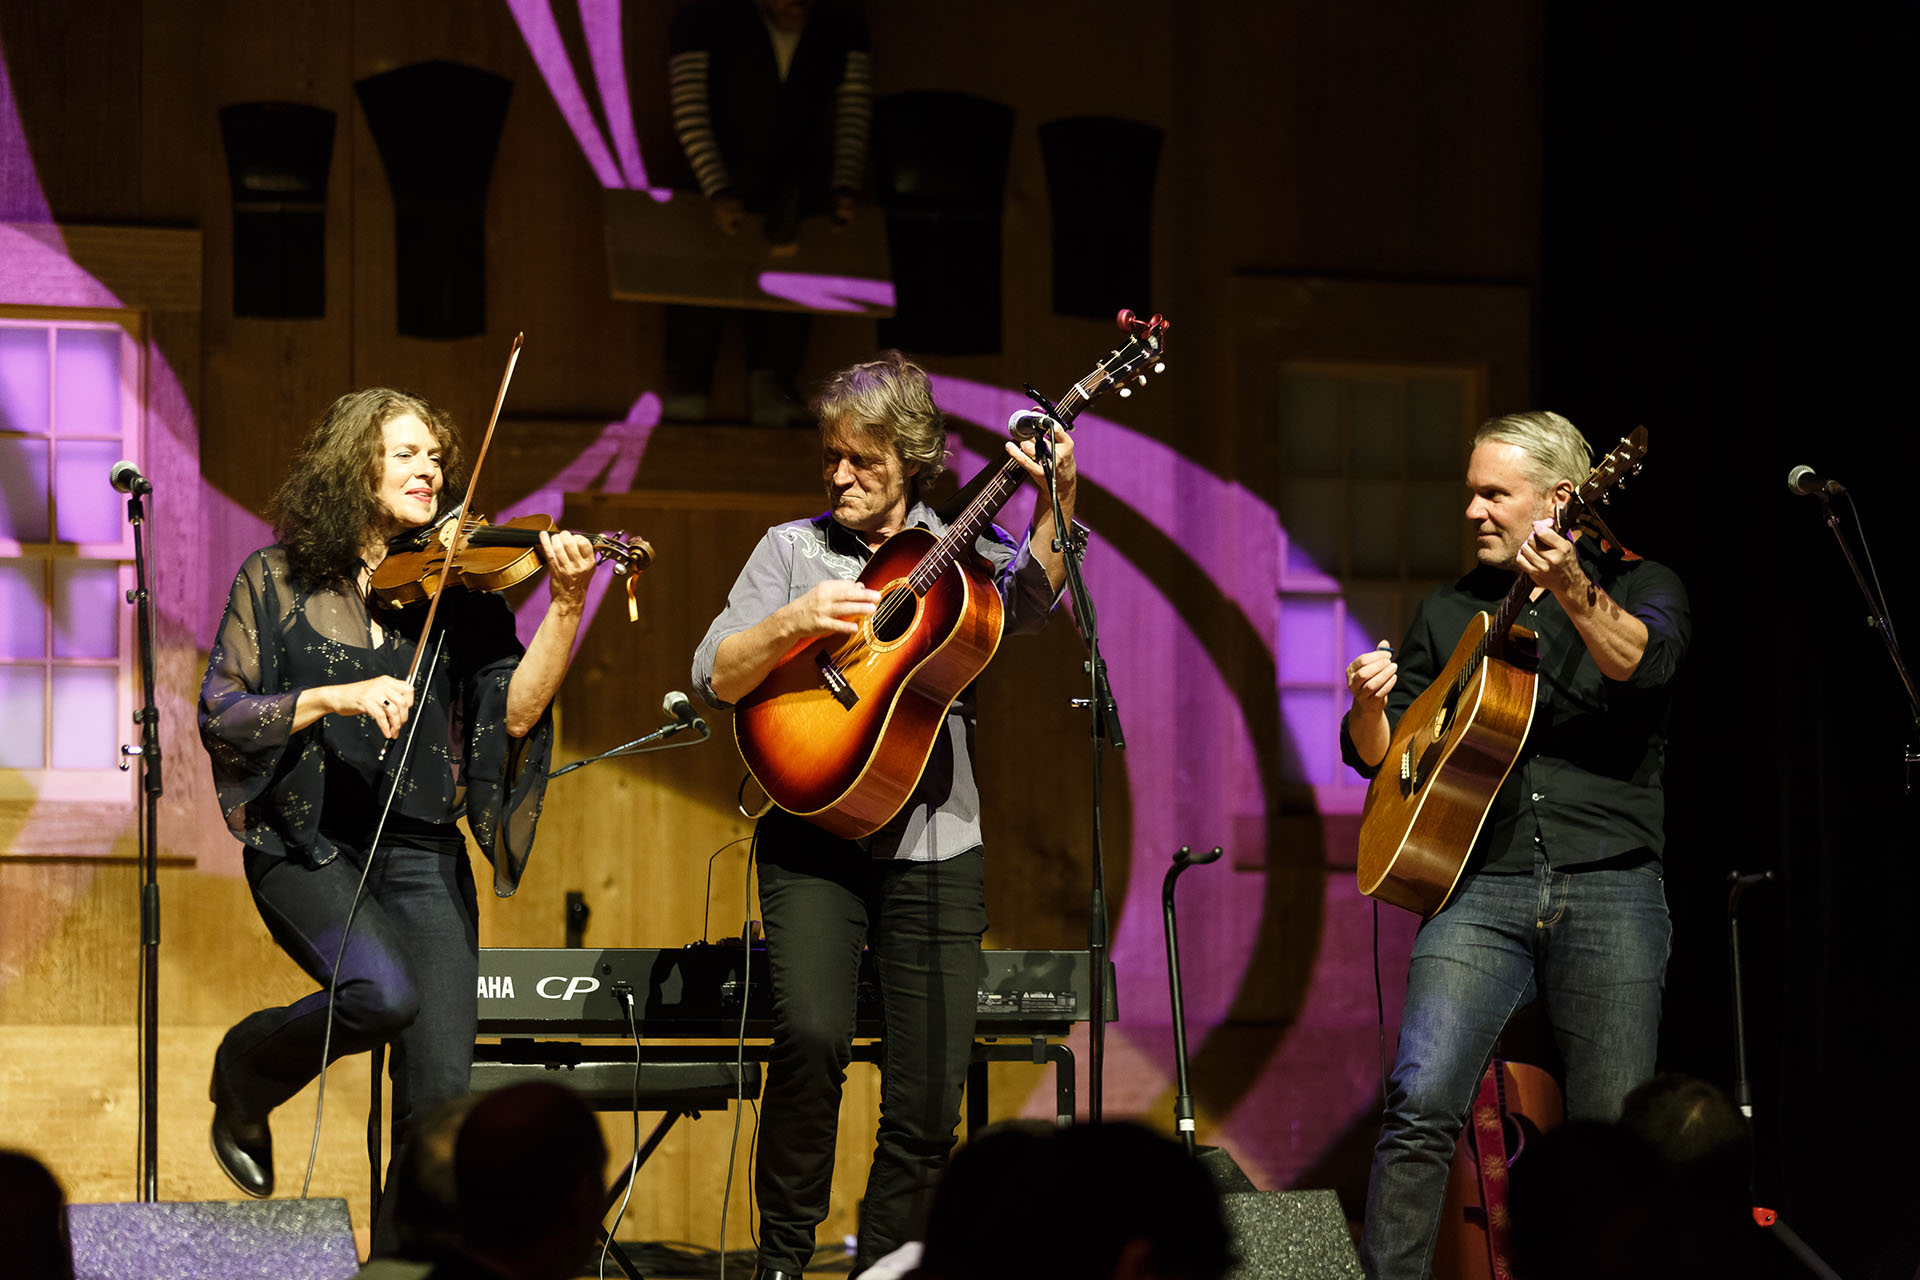 Two men with guitars and a woman with a violin performing on stage